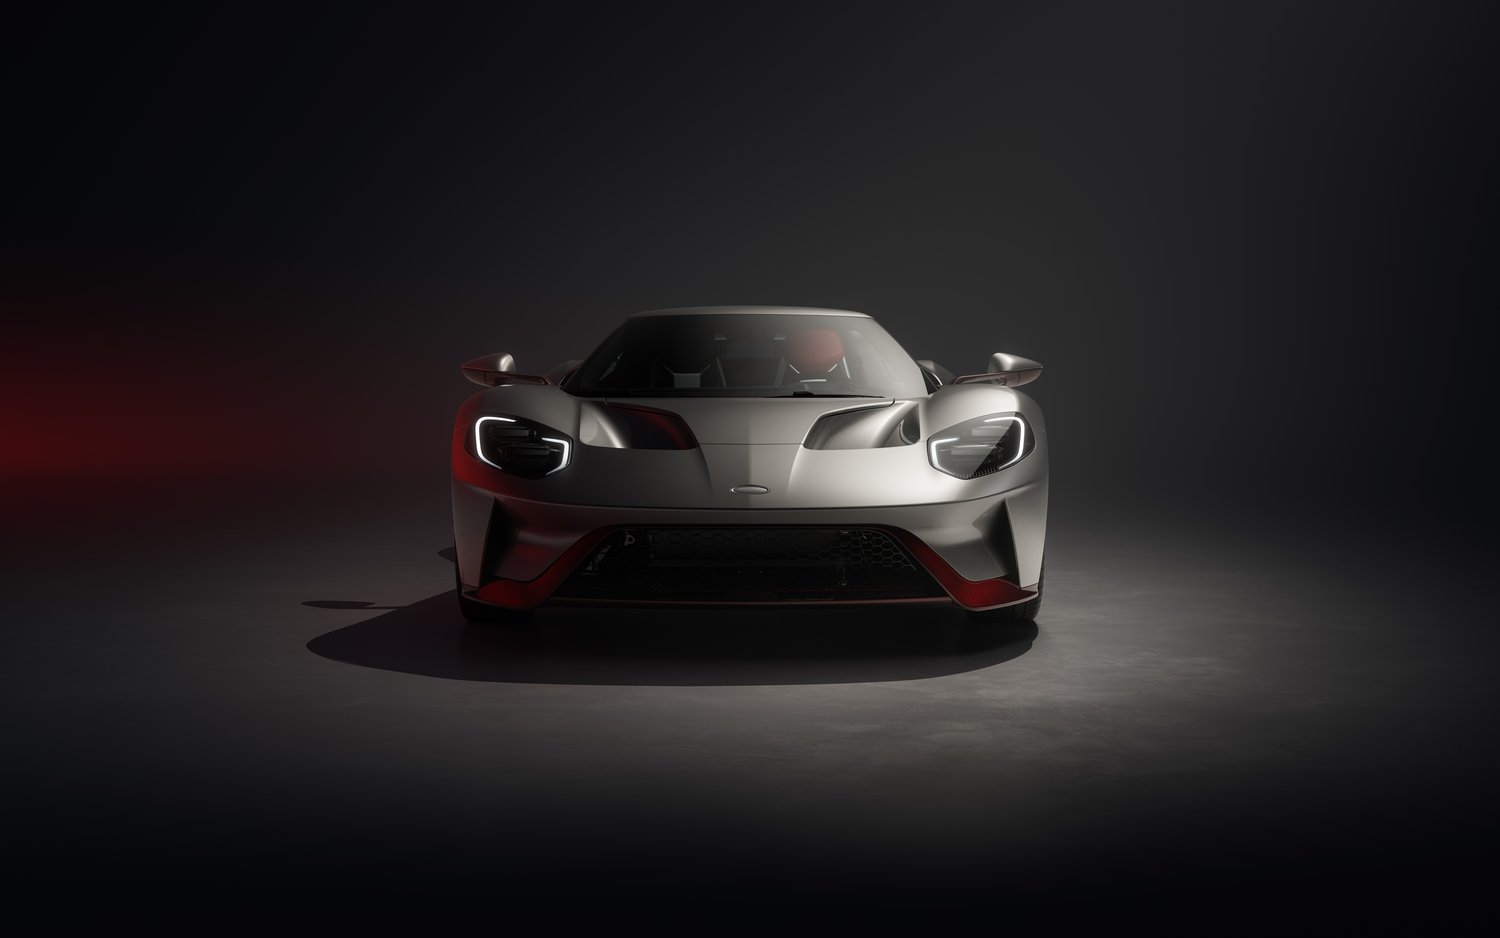 MARKING THE FINAL SPECIAL EDITION, NEW 2022 FORD GT LM CELEBRATES FORD’S LE MANS-WINNING HERITAGE — Petersen Automotive Museum